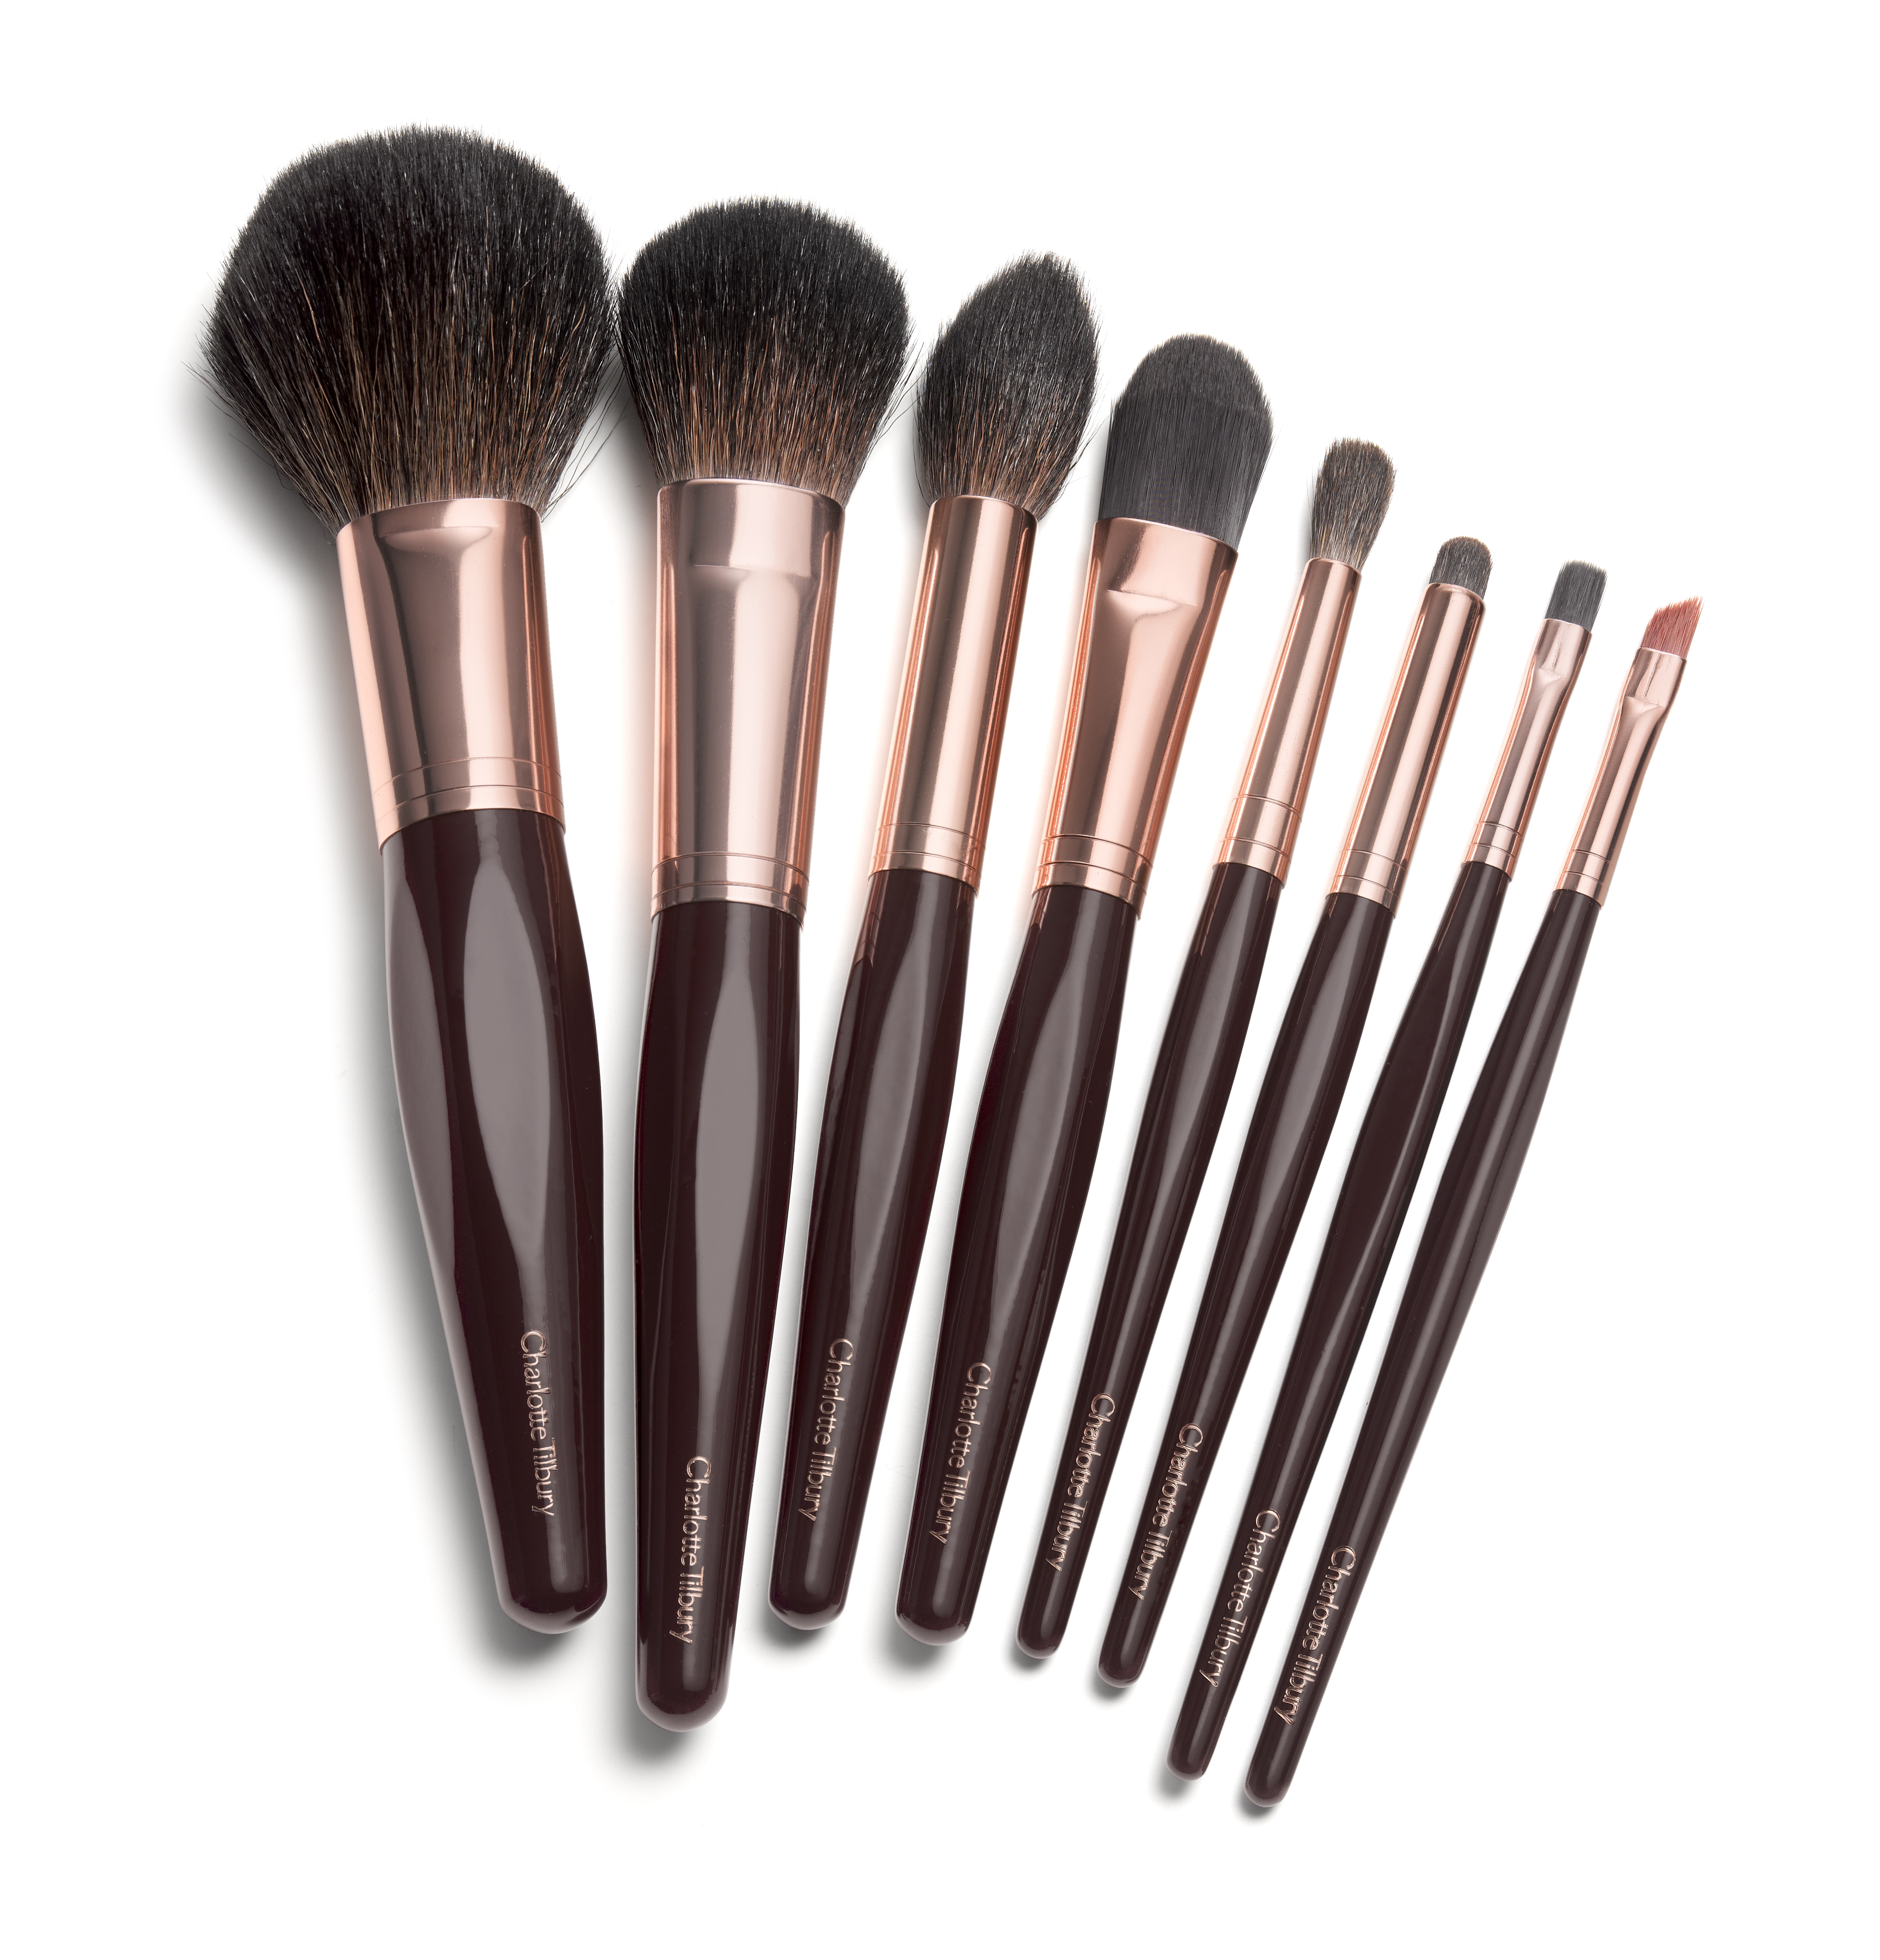 Charlotte Tilbury Makeup Brushes full collection